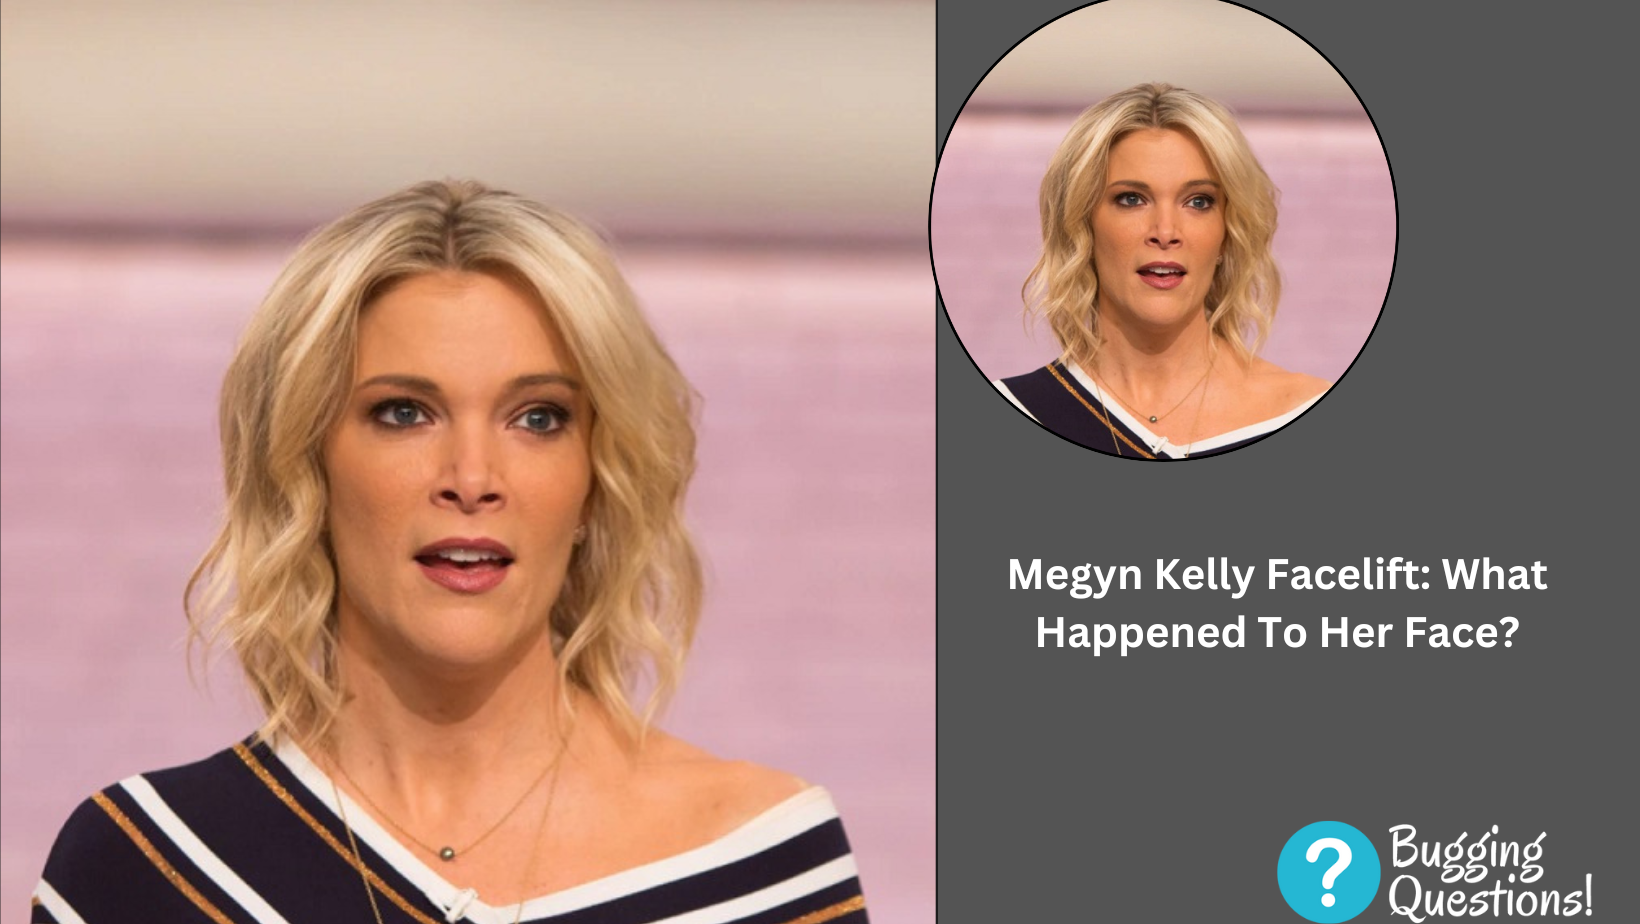 Megyn Kelly Facelift: What Happened To Her Face?